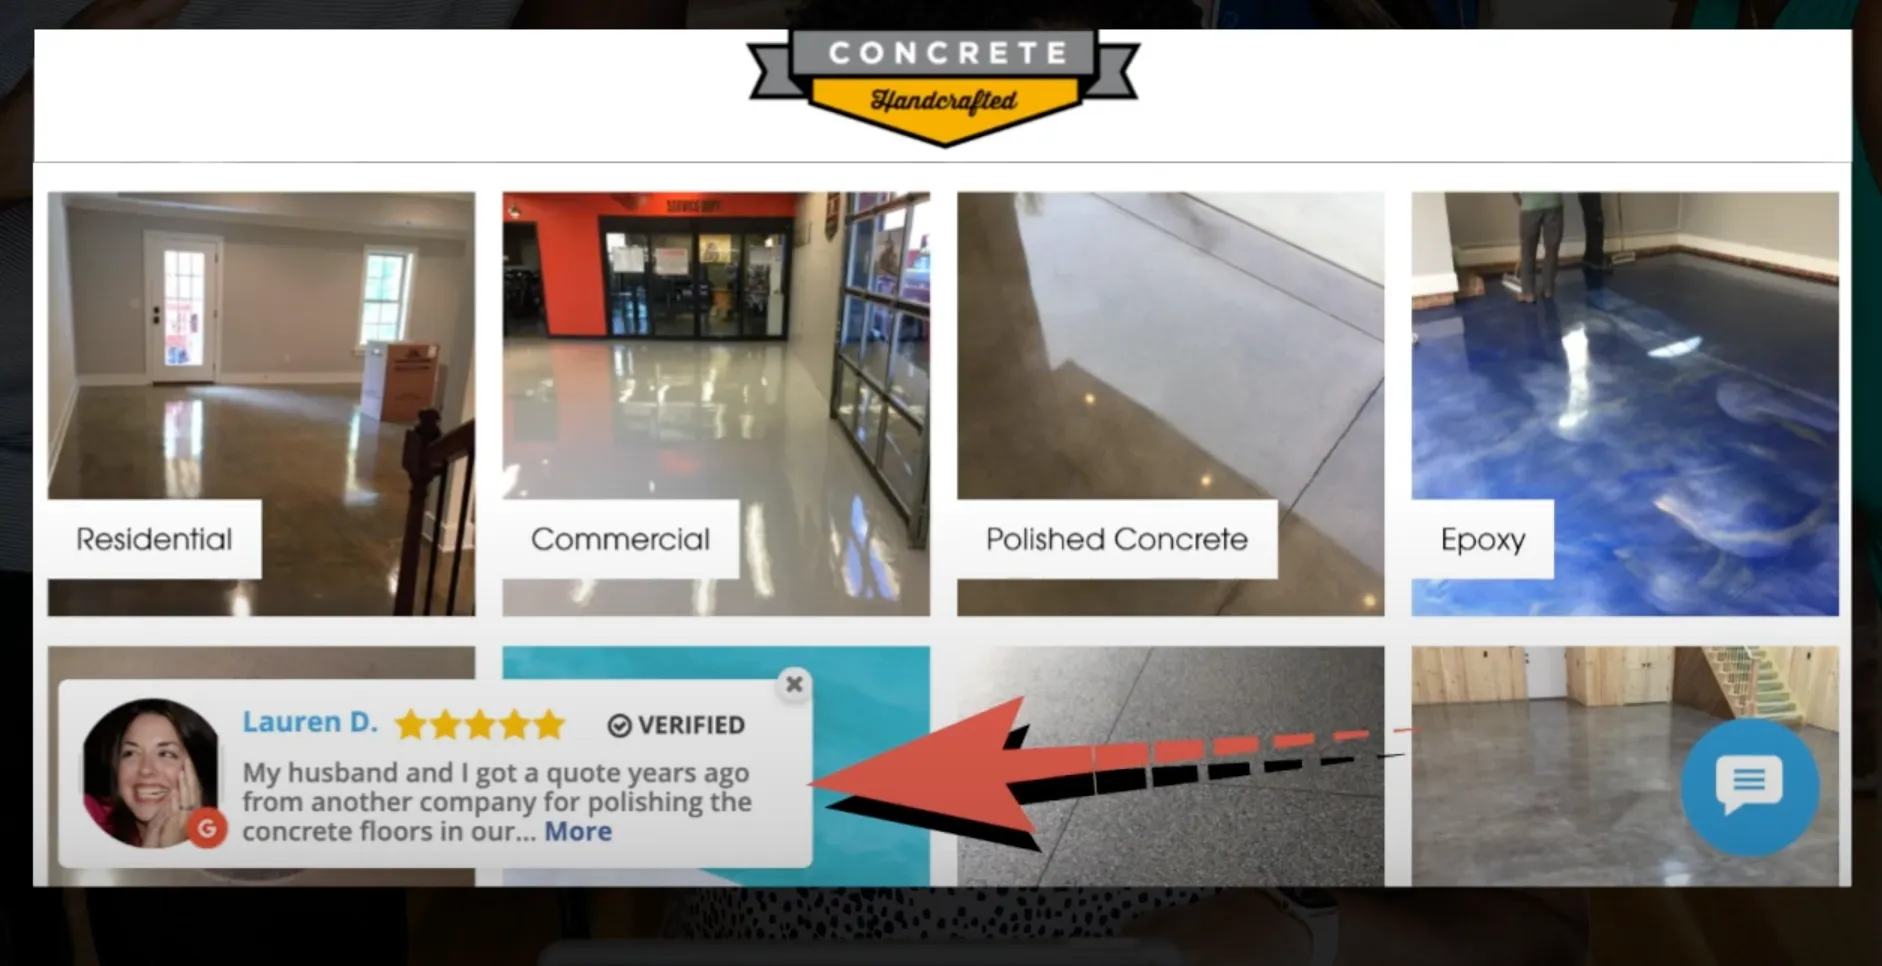 5-star reviews important in concrete marketing